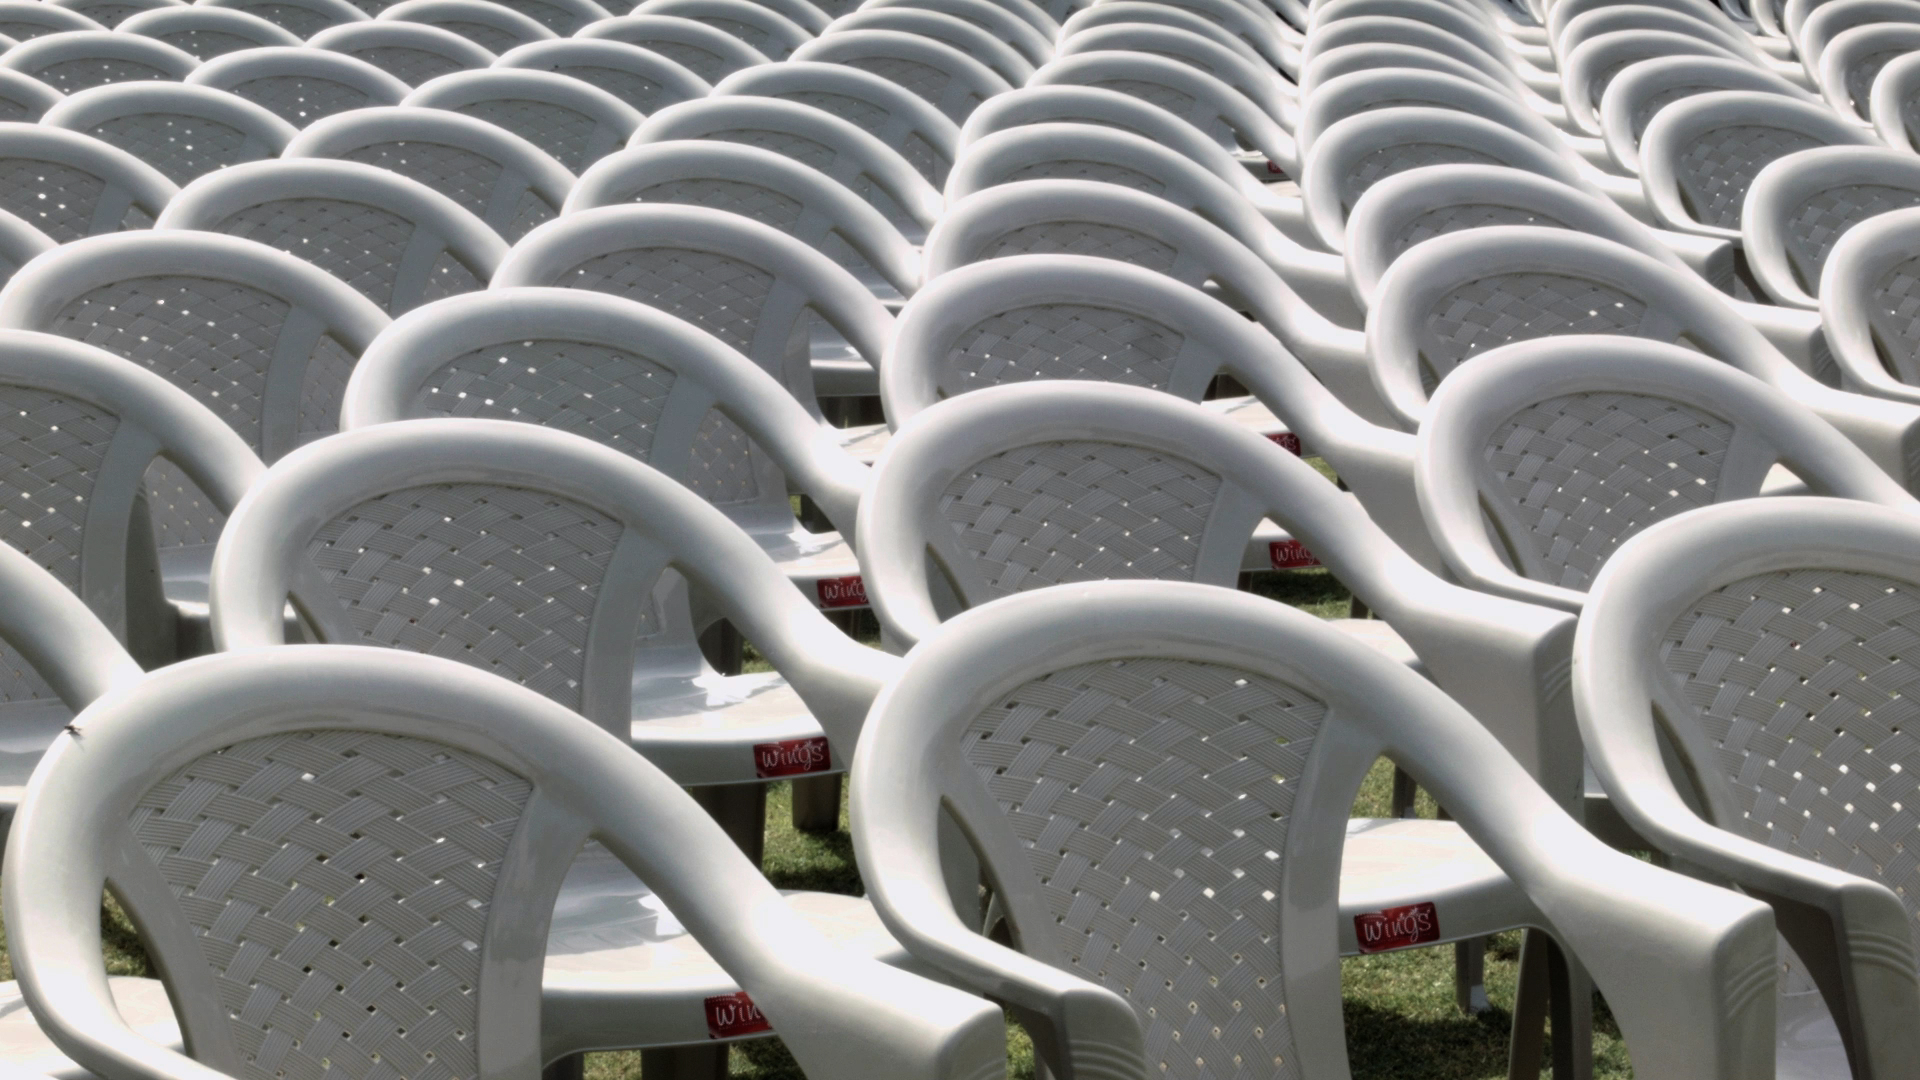 rows and rows of empty white plastic chairs